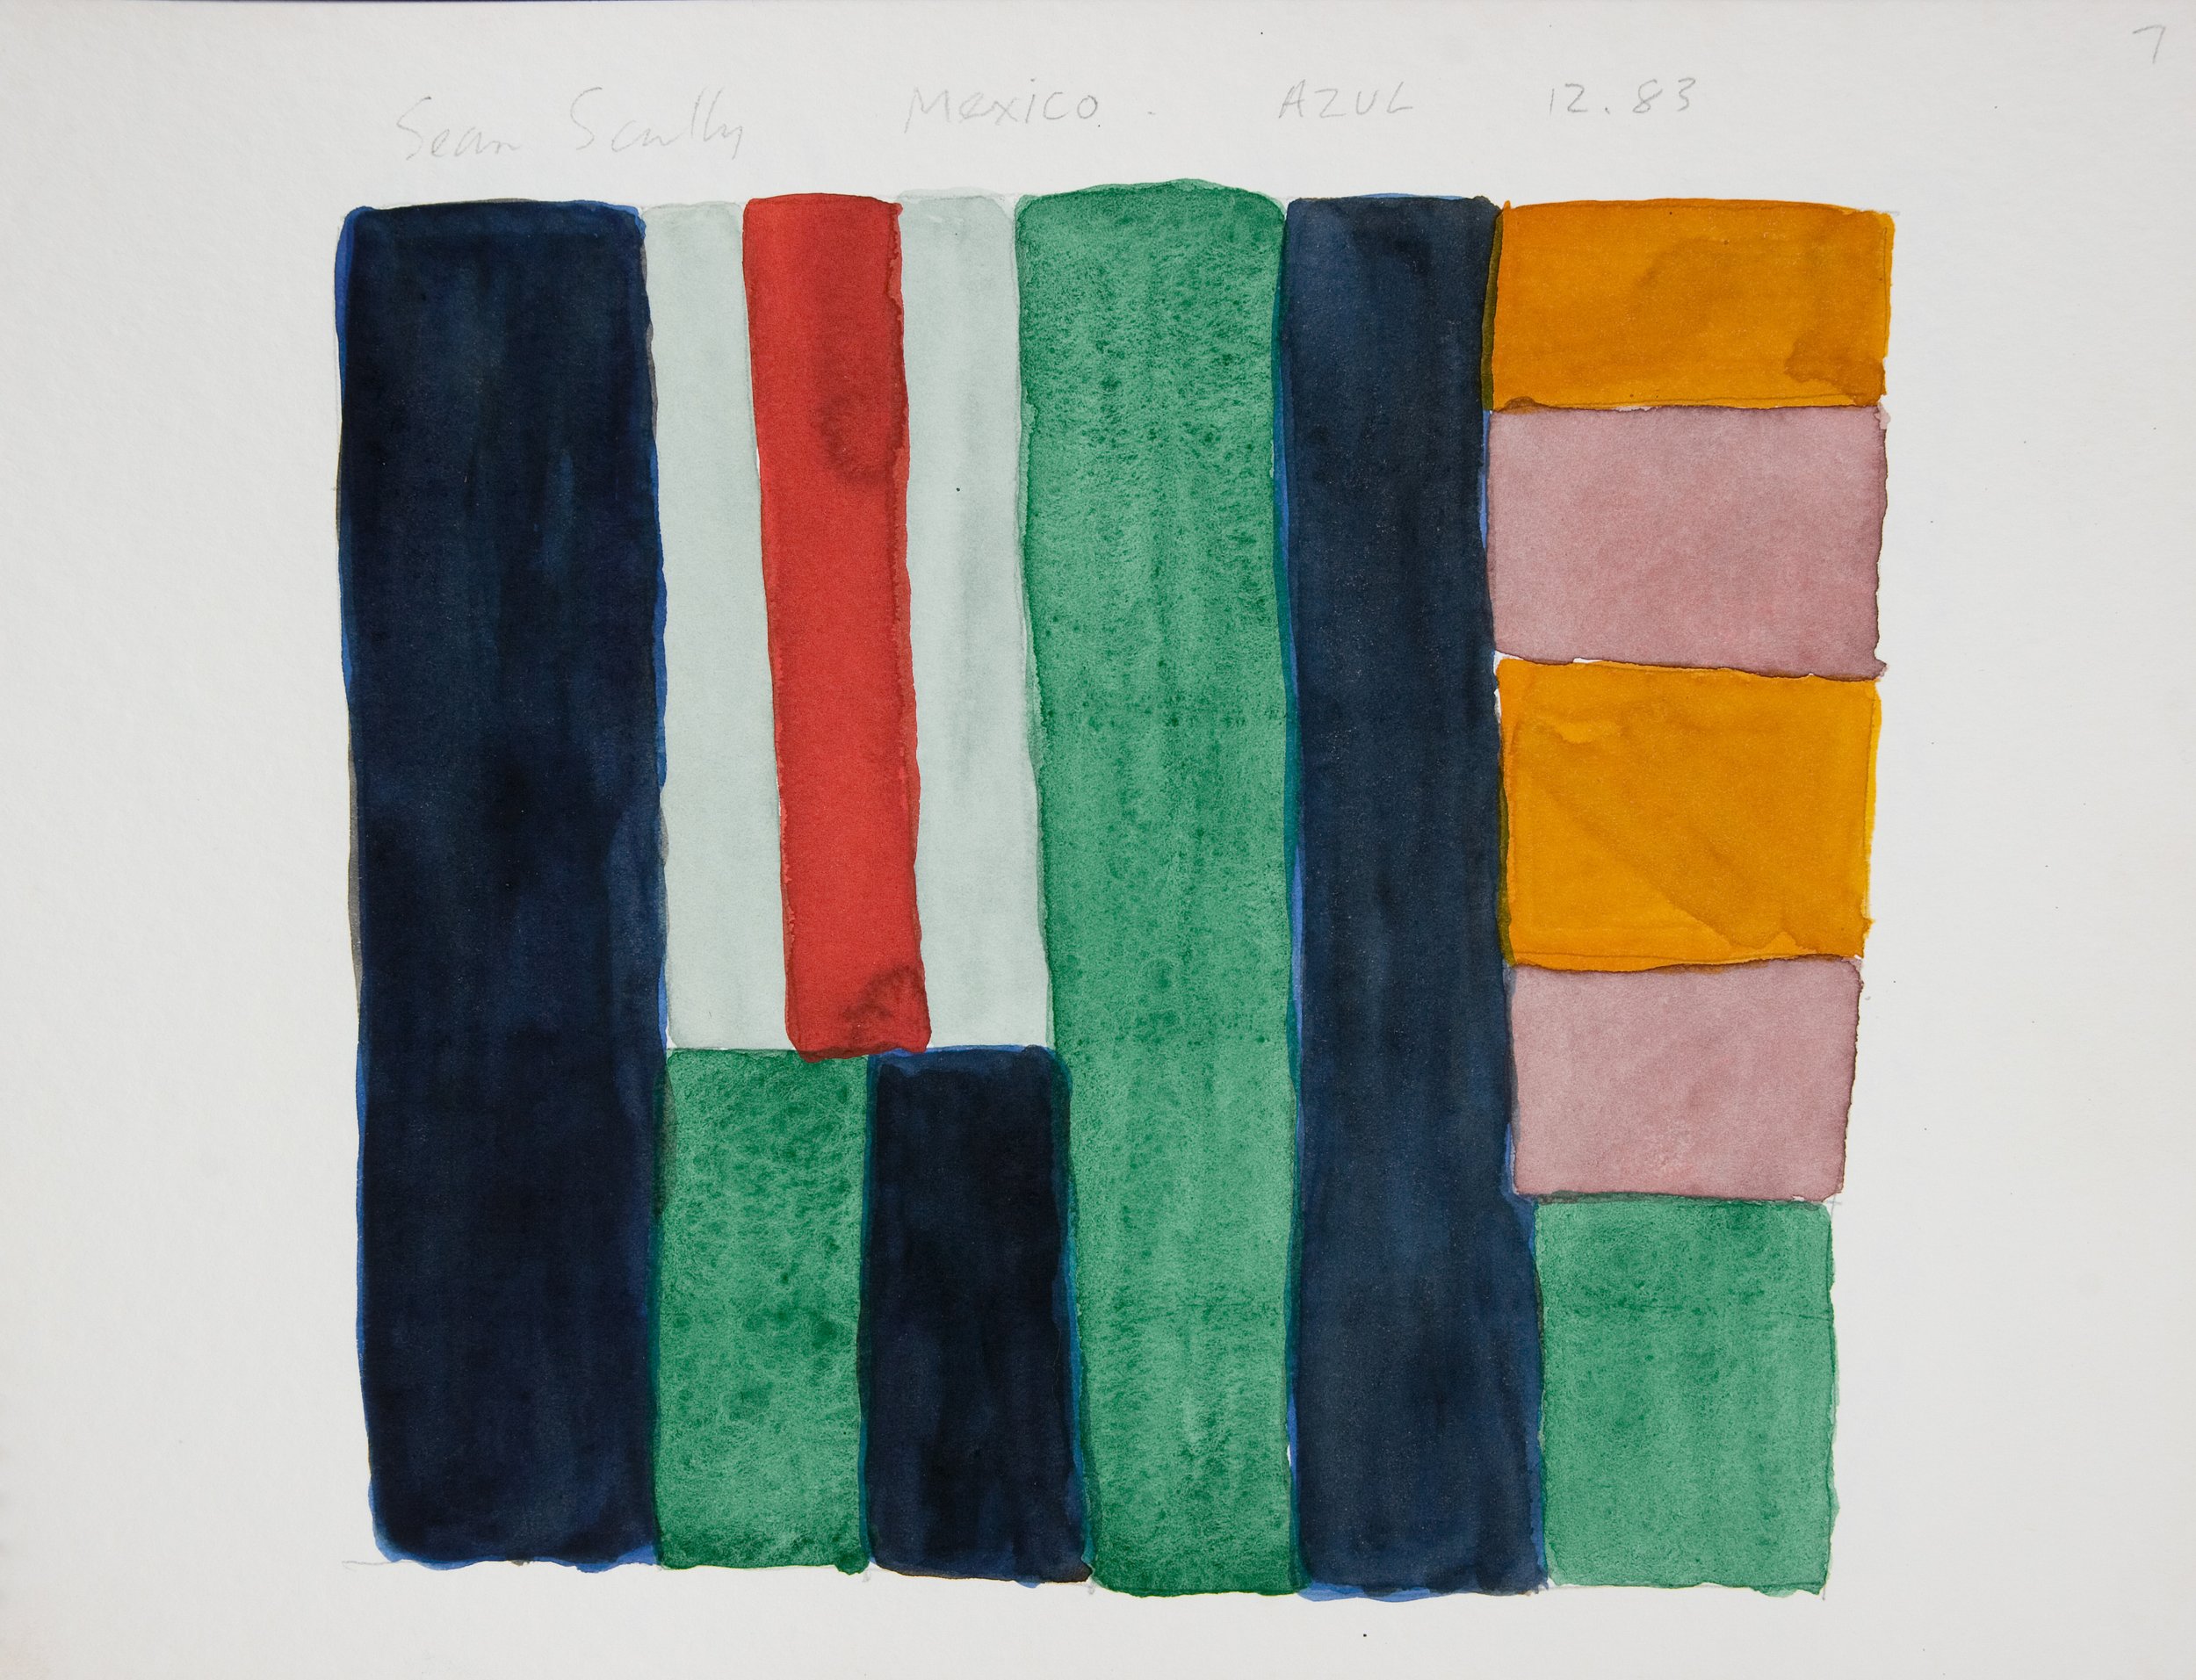 image06-seanscully-mexicoazul12.83-1983.jpg